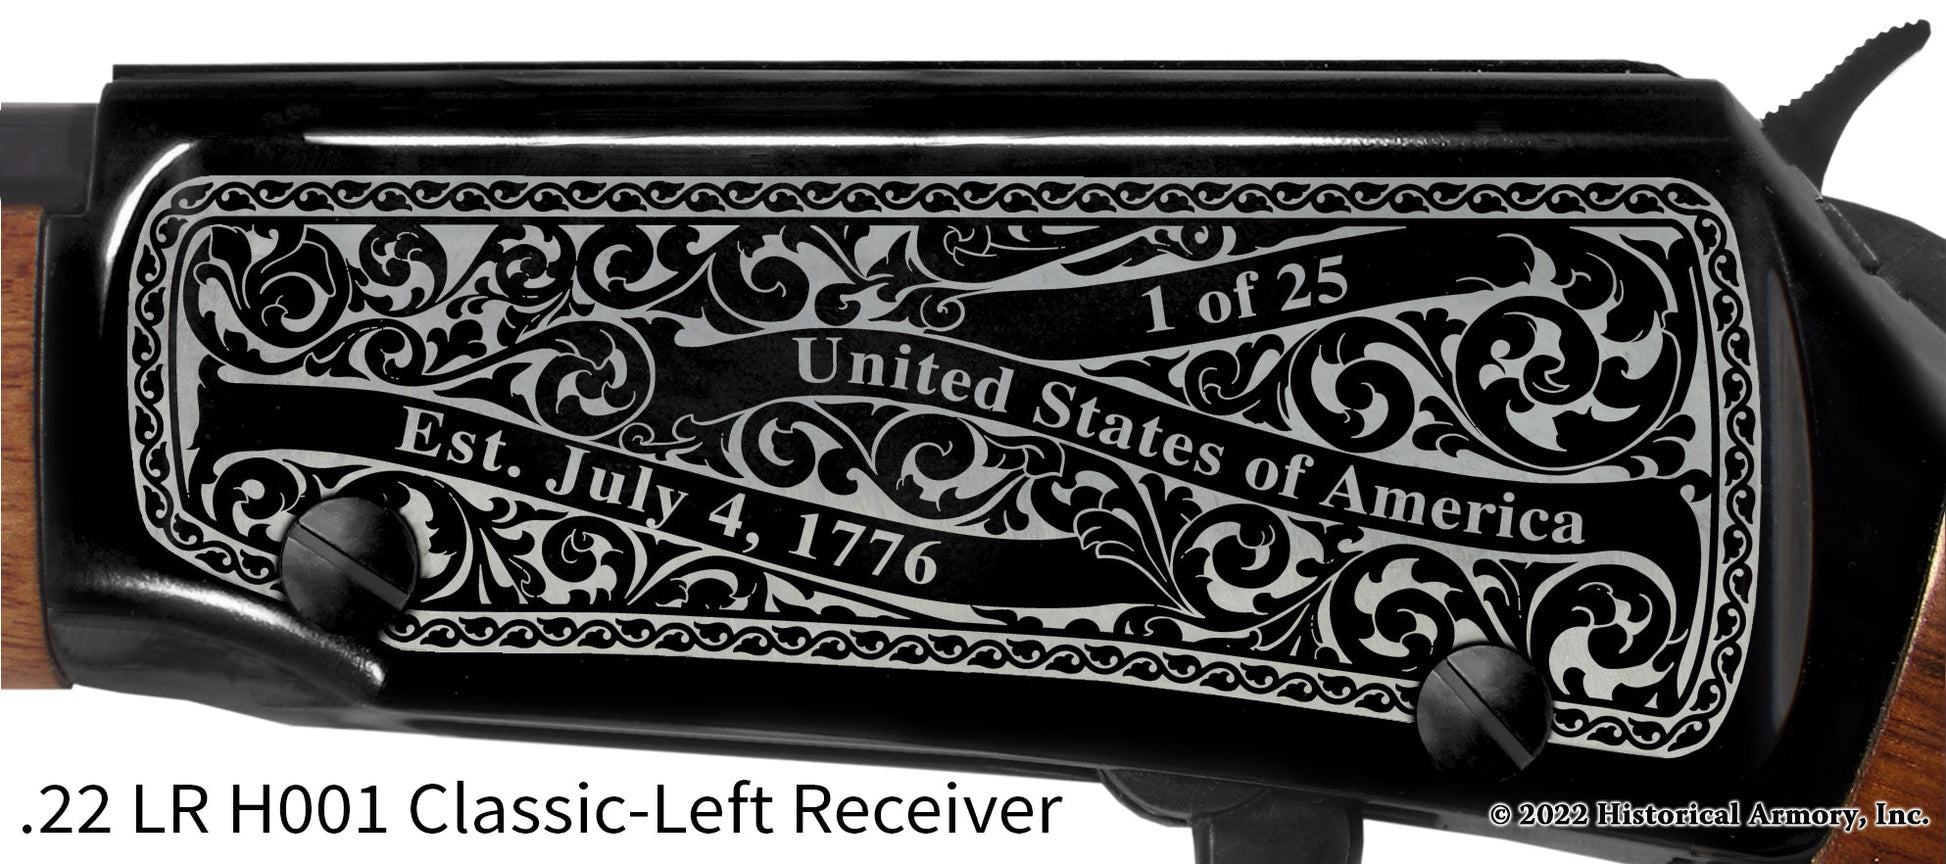 Braxton County West Virginia Engraved Henry H001 Rifle